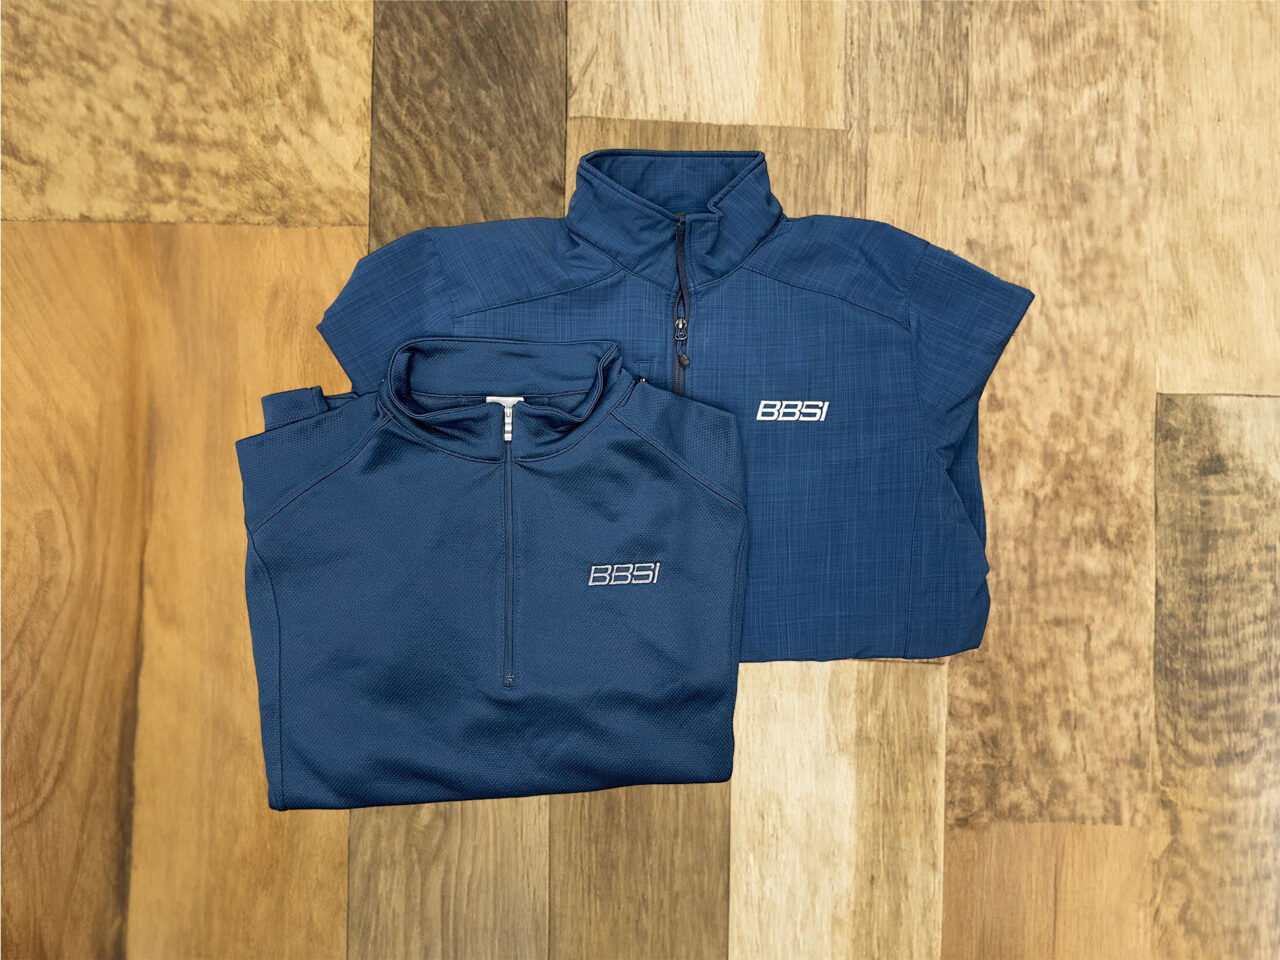 Example of Morel's apparel capabilities, showing branded shirts for their client, BBSI.